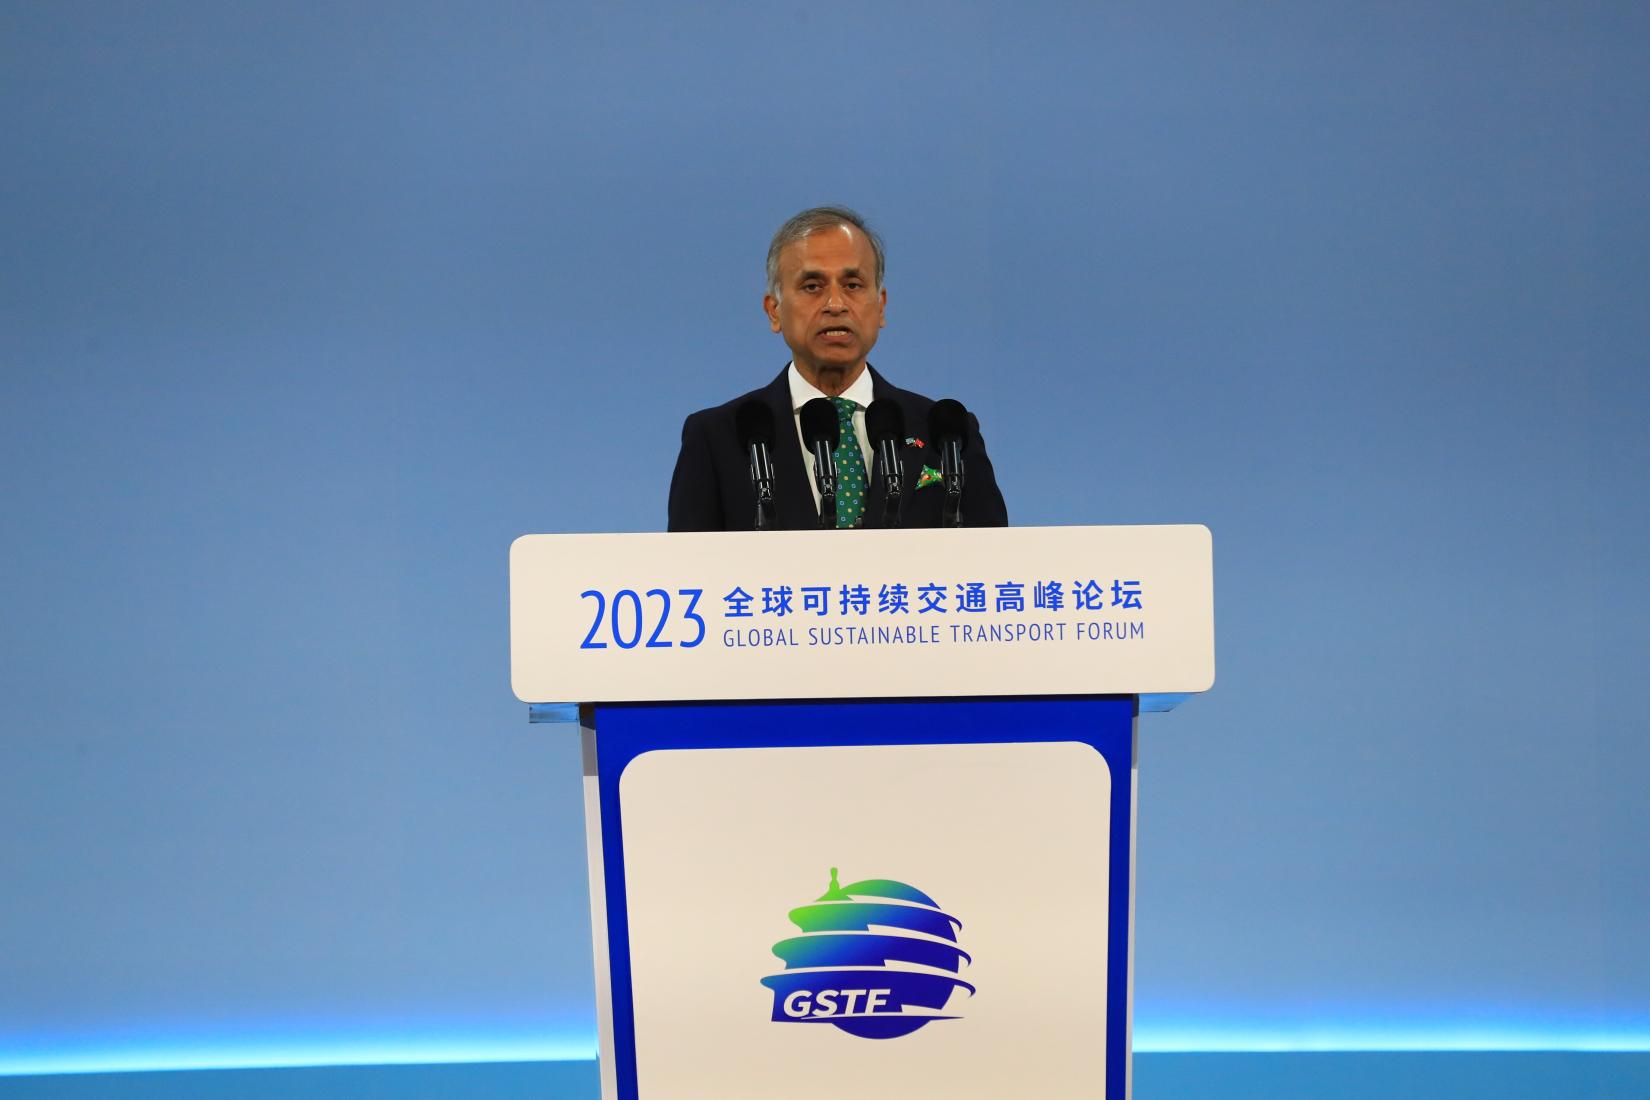 UN Resident Coordinator Siddharth Chatterjee at the Global Sustainable Transport Forum